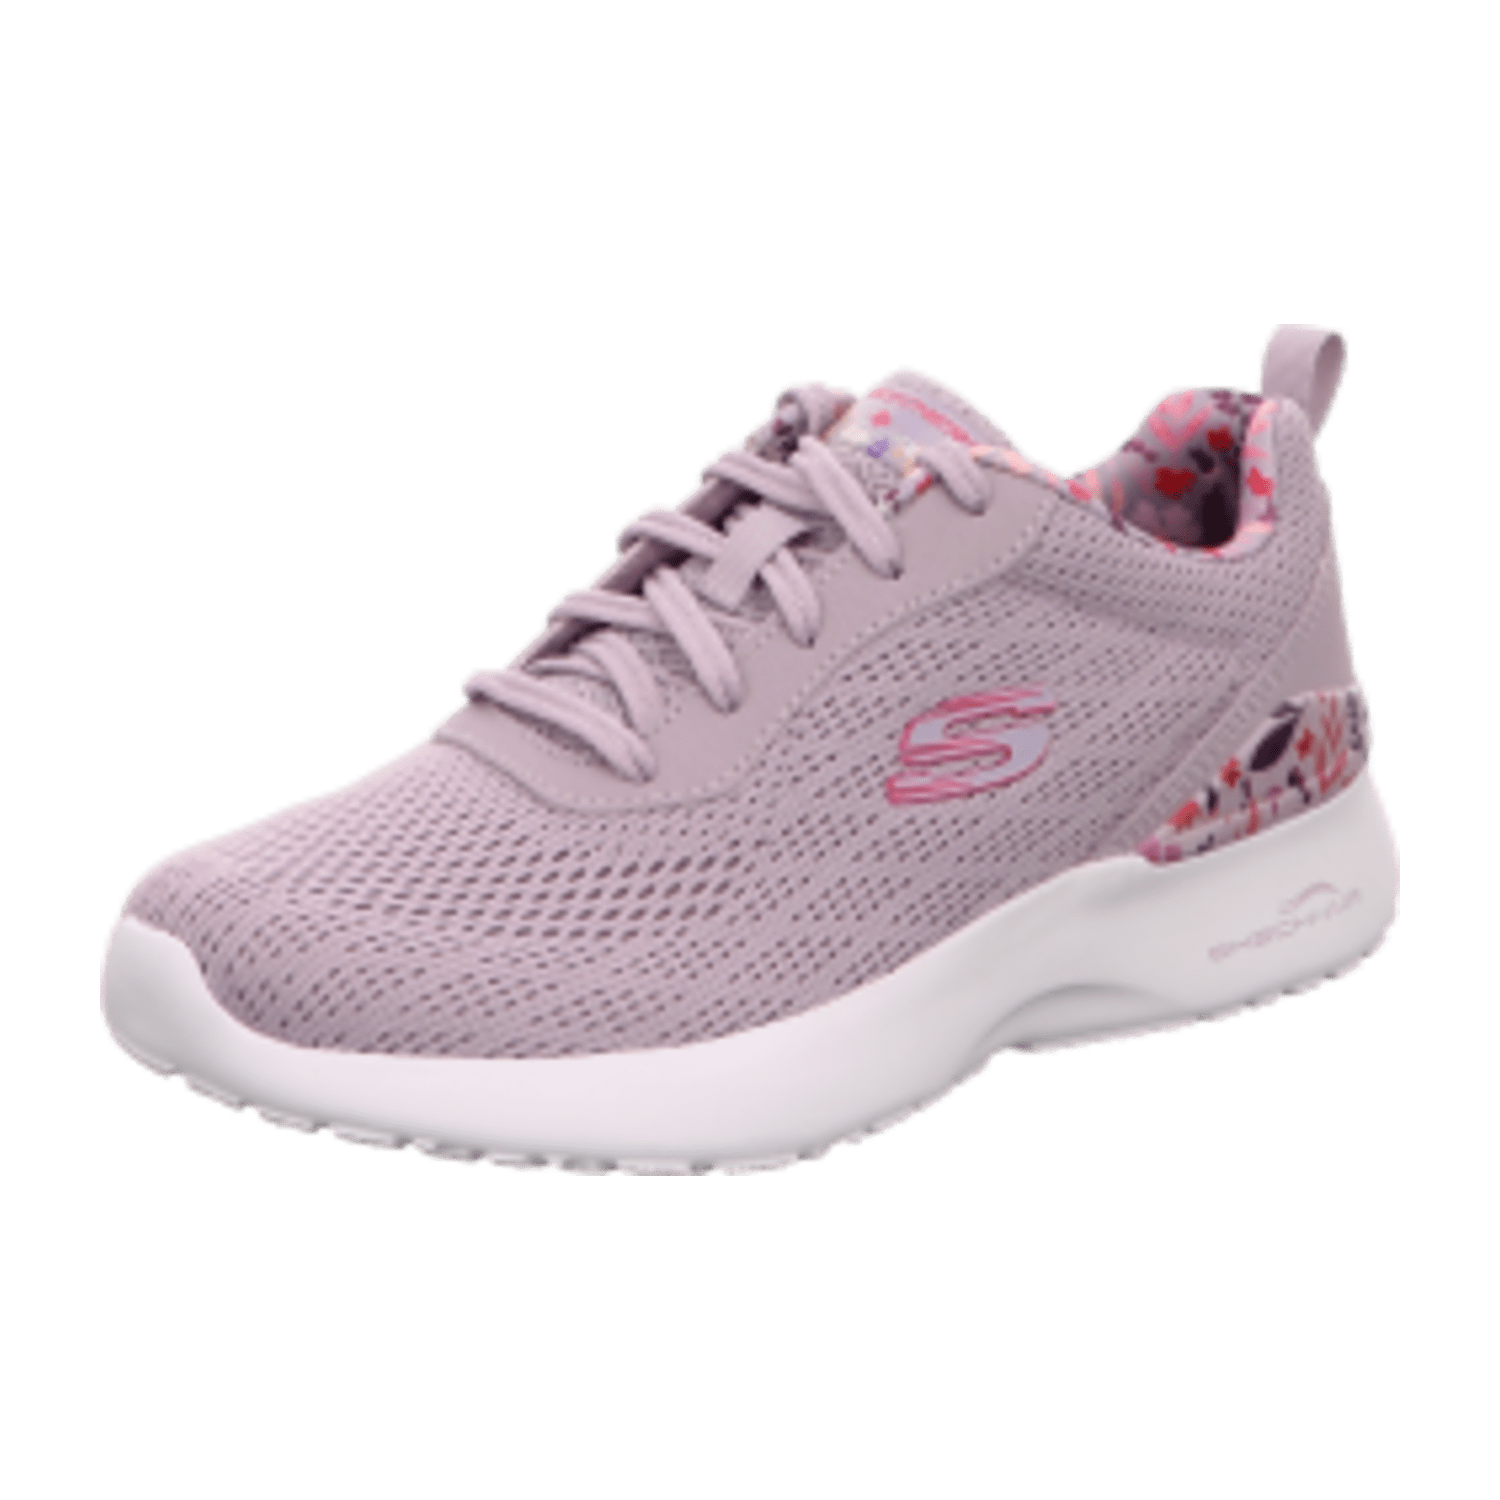 Skechers Skech-Air Dynamight-LAID OUT